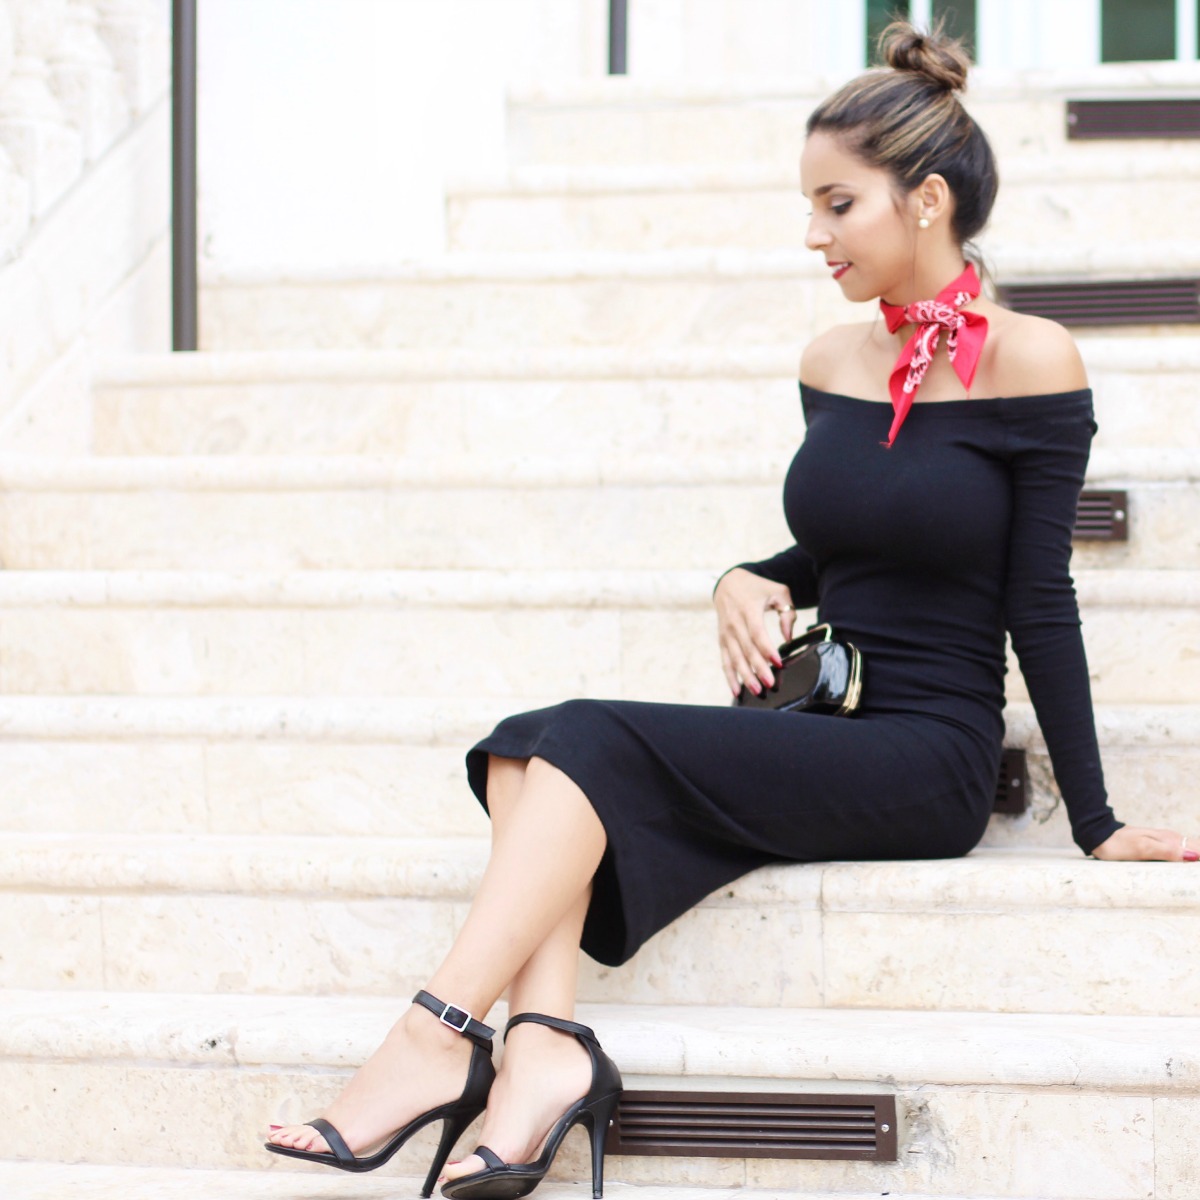 Off the shoulder little black dress with red bandanna and strappy heels